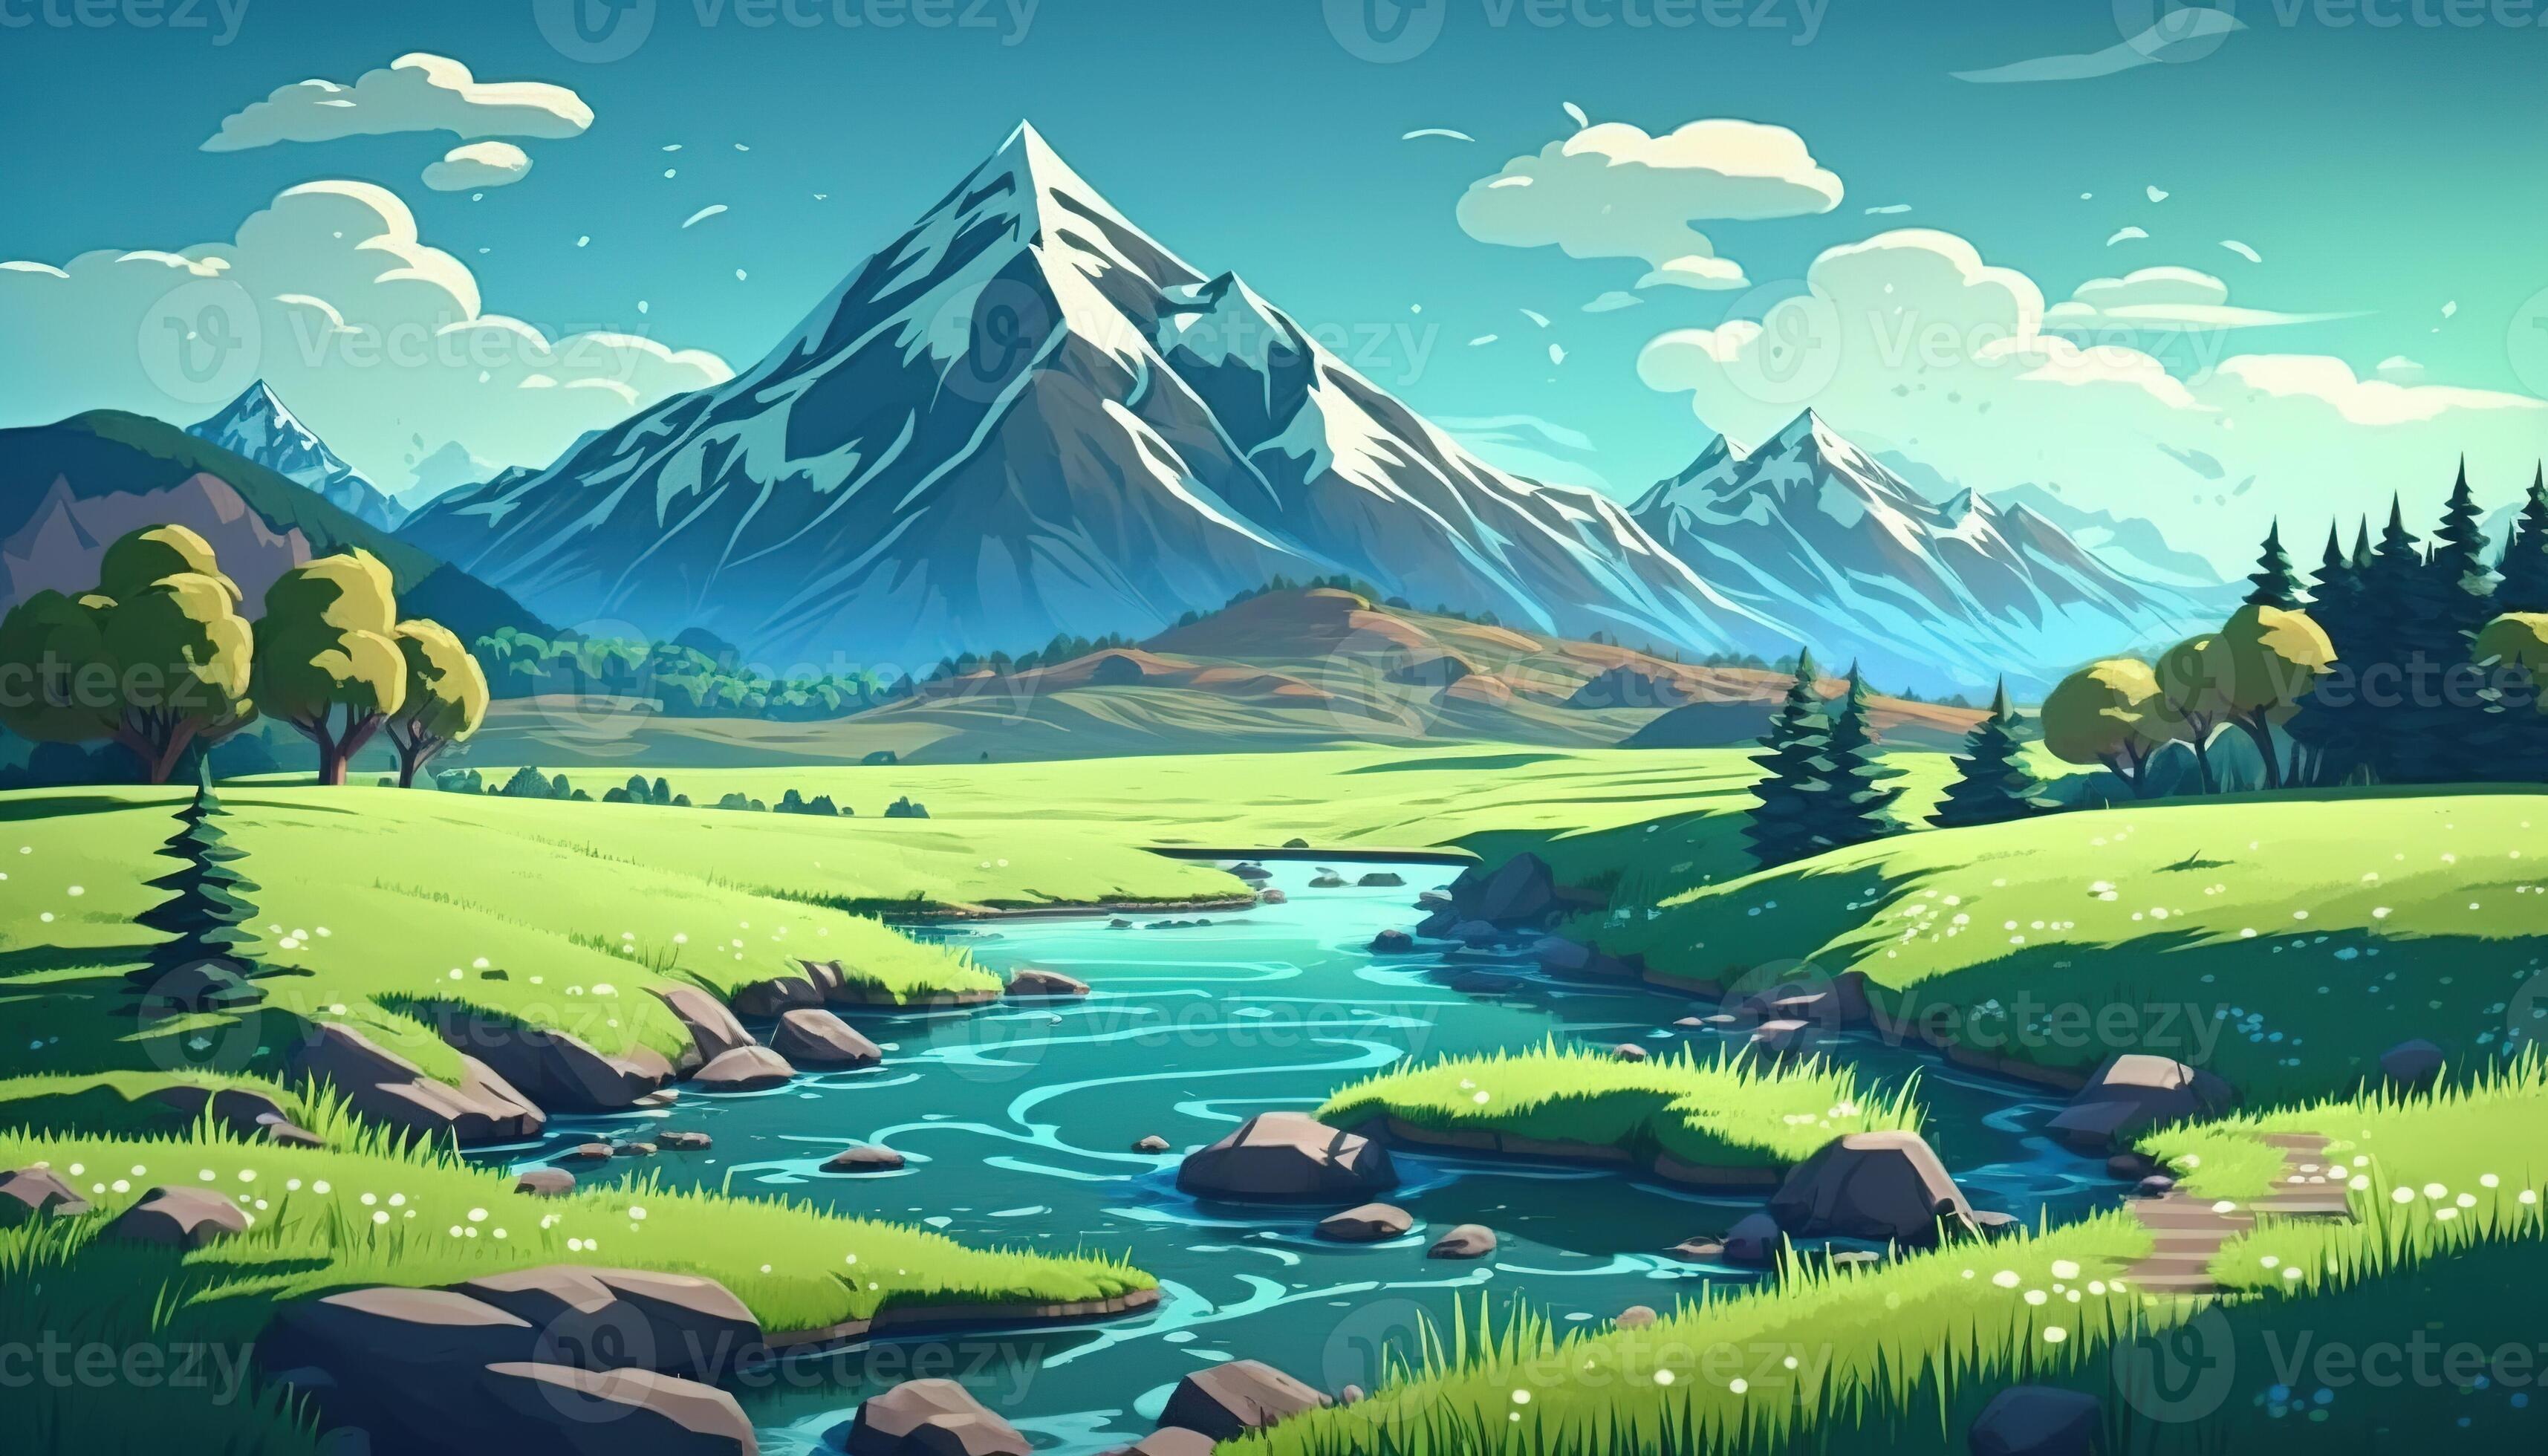 ⦿ Dolina Rave A-beautiful-anime-style-summer-landscape-green-valley-river-high-mountains-with-snow-capped-peaks-blue-sky-with-white-clouds-ai-generated-photo